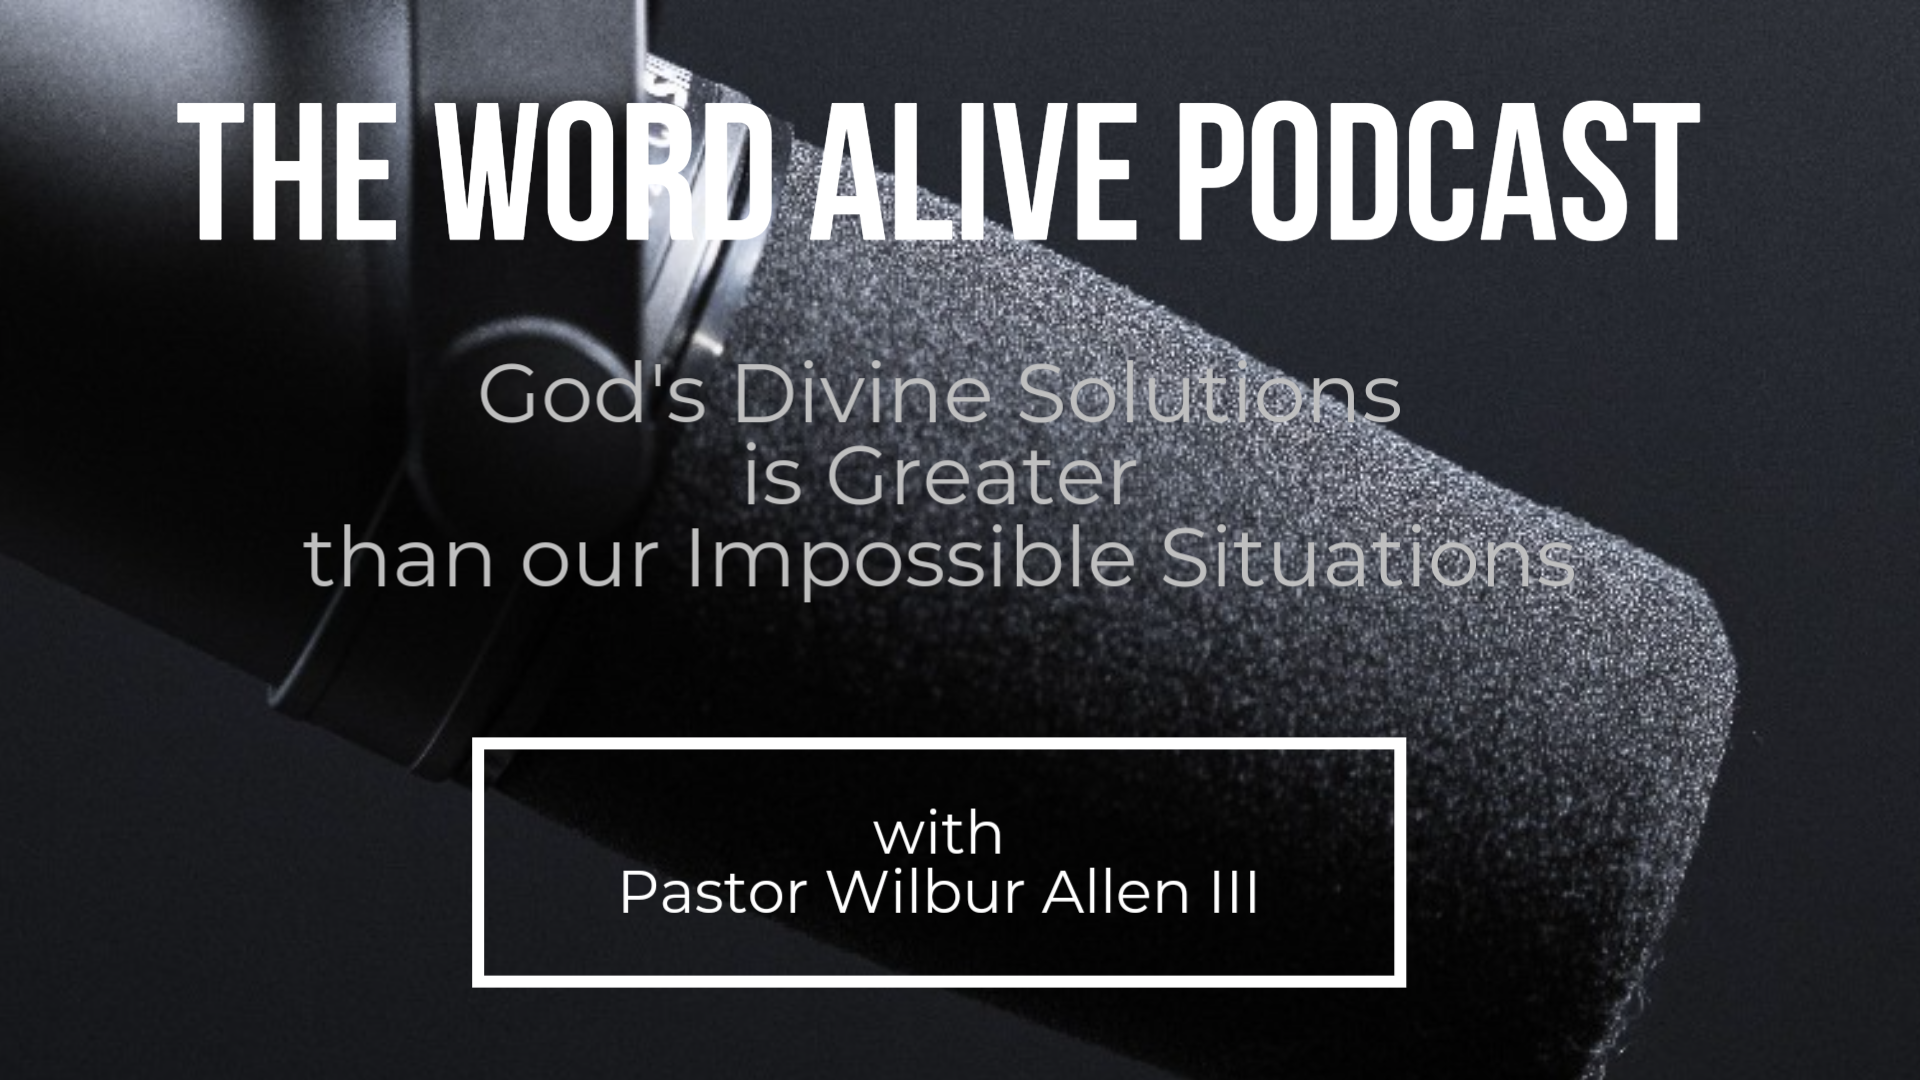 Word Alive Podcast - God's Divine Solutions is Greater than our Impossible Situations